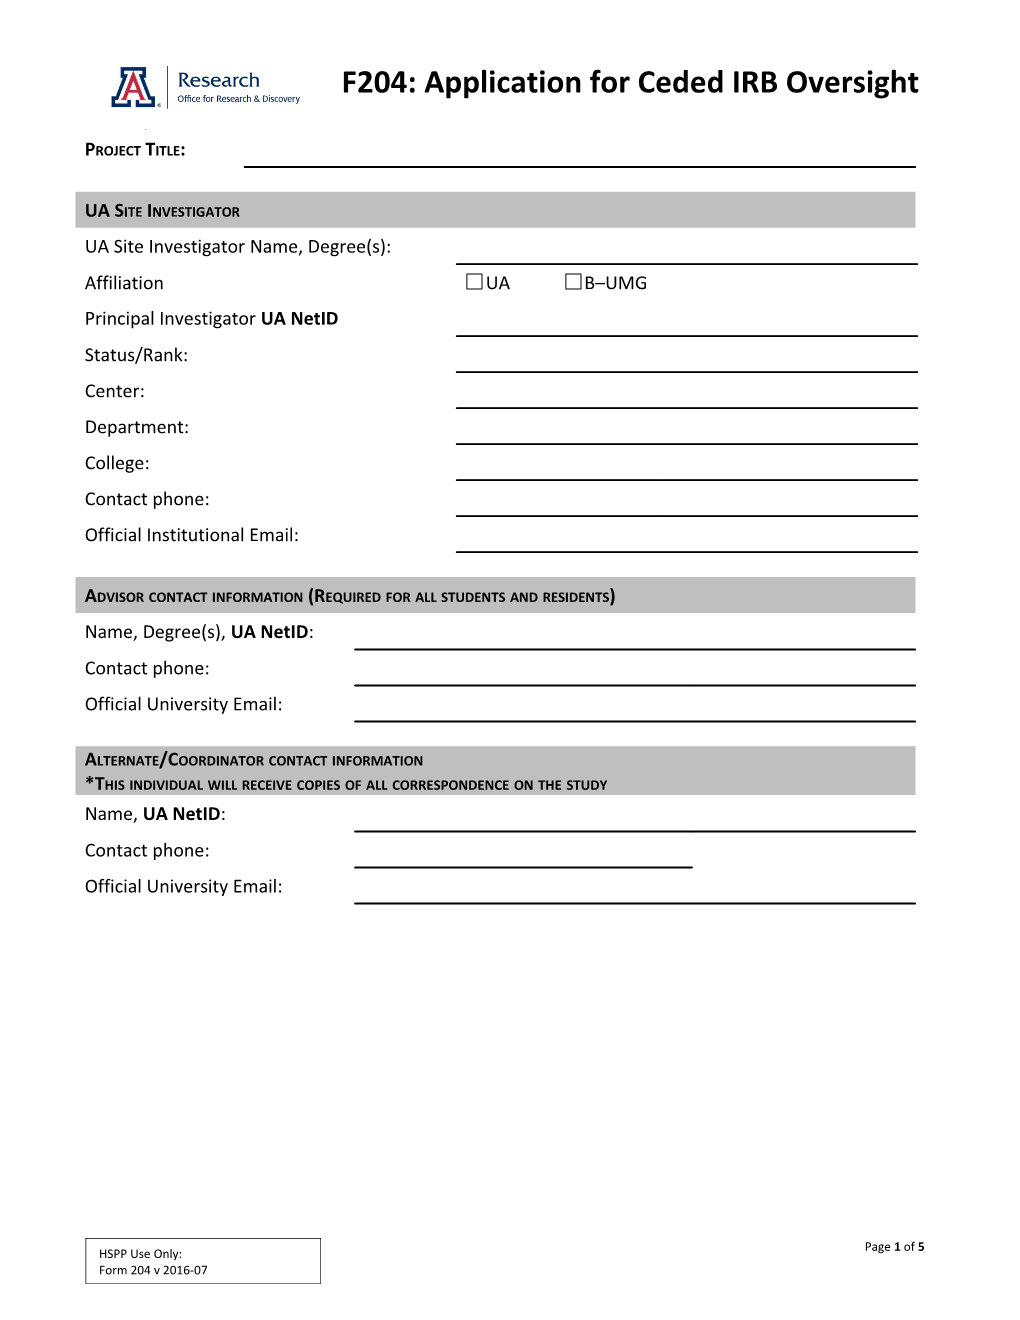 Human Subjects Committee: Sample Forms